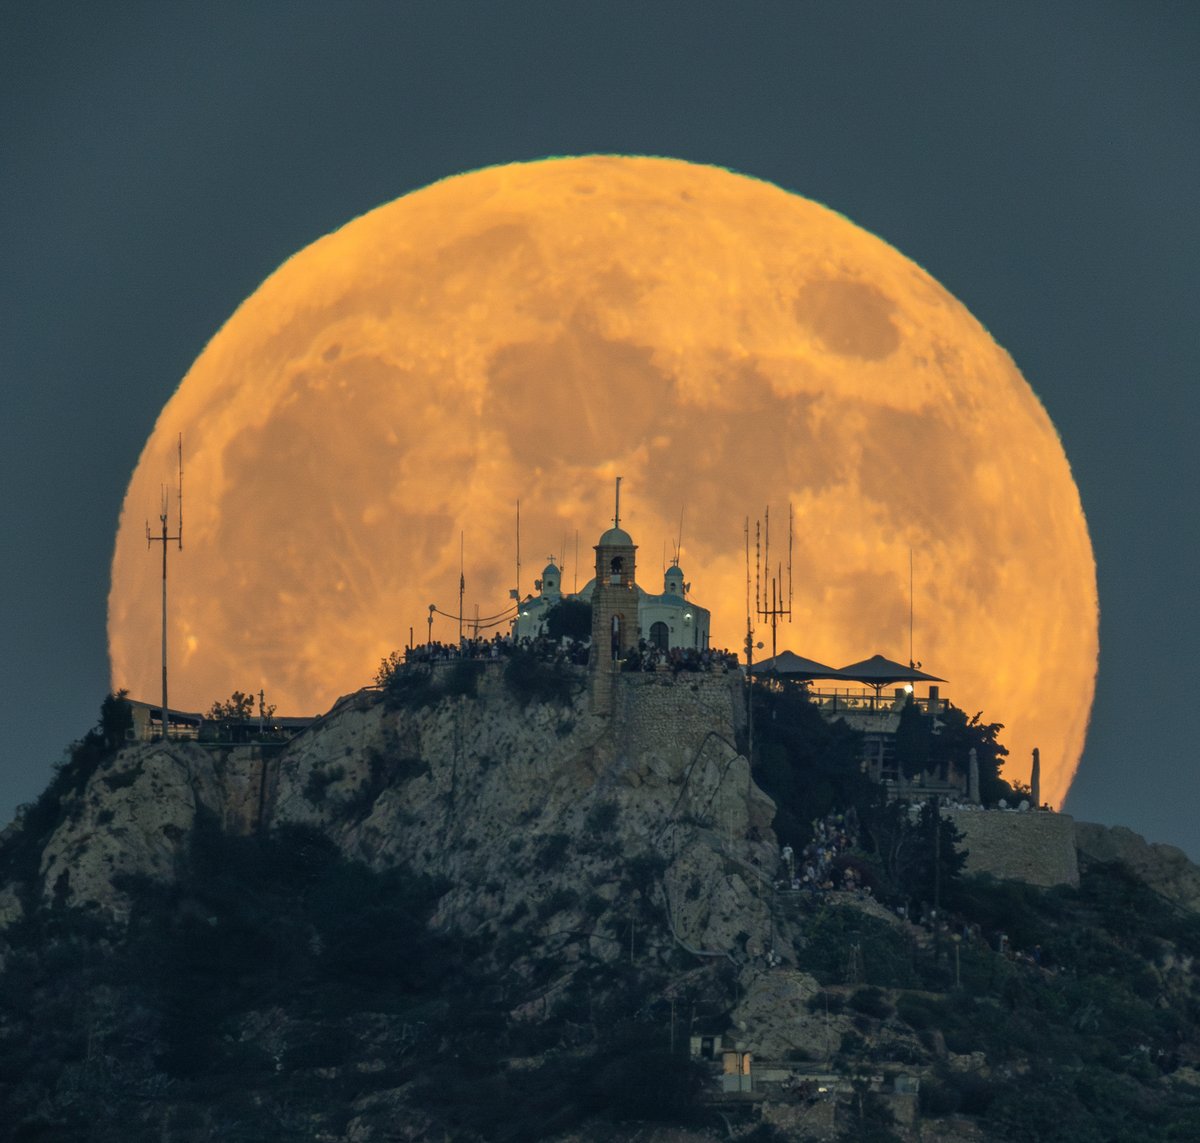 “Hello! The Full Moon rises behind the Church of St.George at Mount Lycabettus, Athens.” 📷 Sony a7 III | 1250mm | ƒ/14 | 1/100ss | ISO 2000 | Skywatcher Skymax 90 👉 Photo by Babis Kotsiotas 📍 Planned with PhotoPills: photopills.com